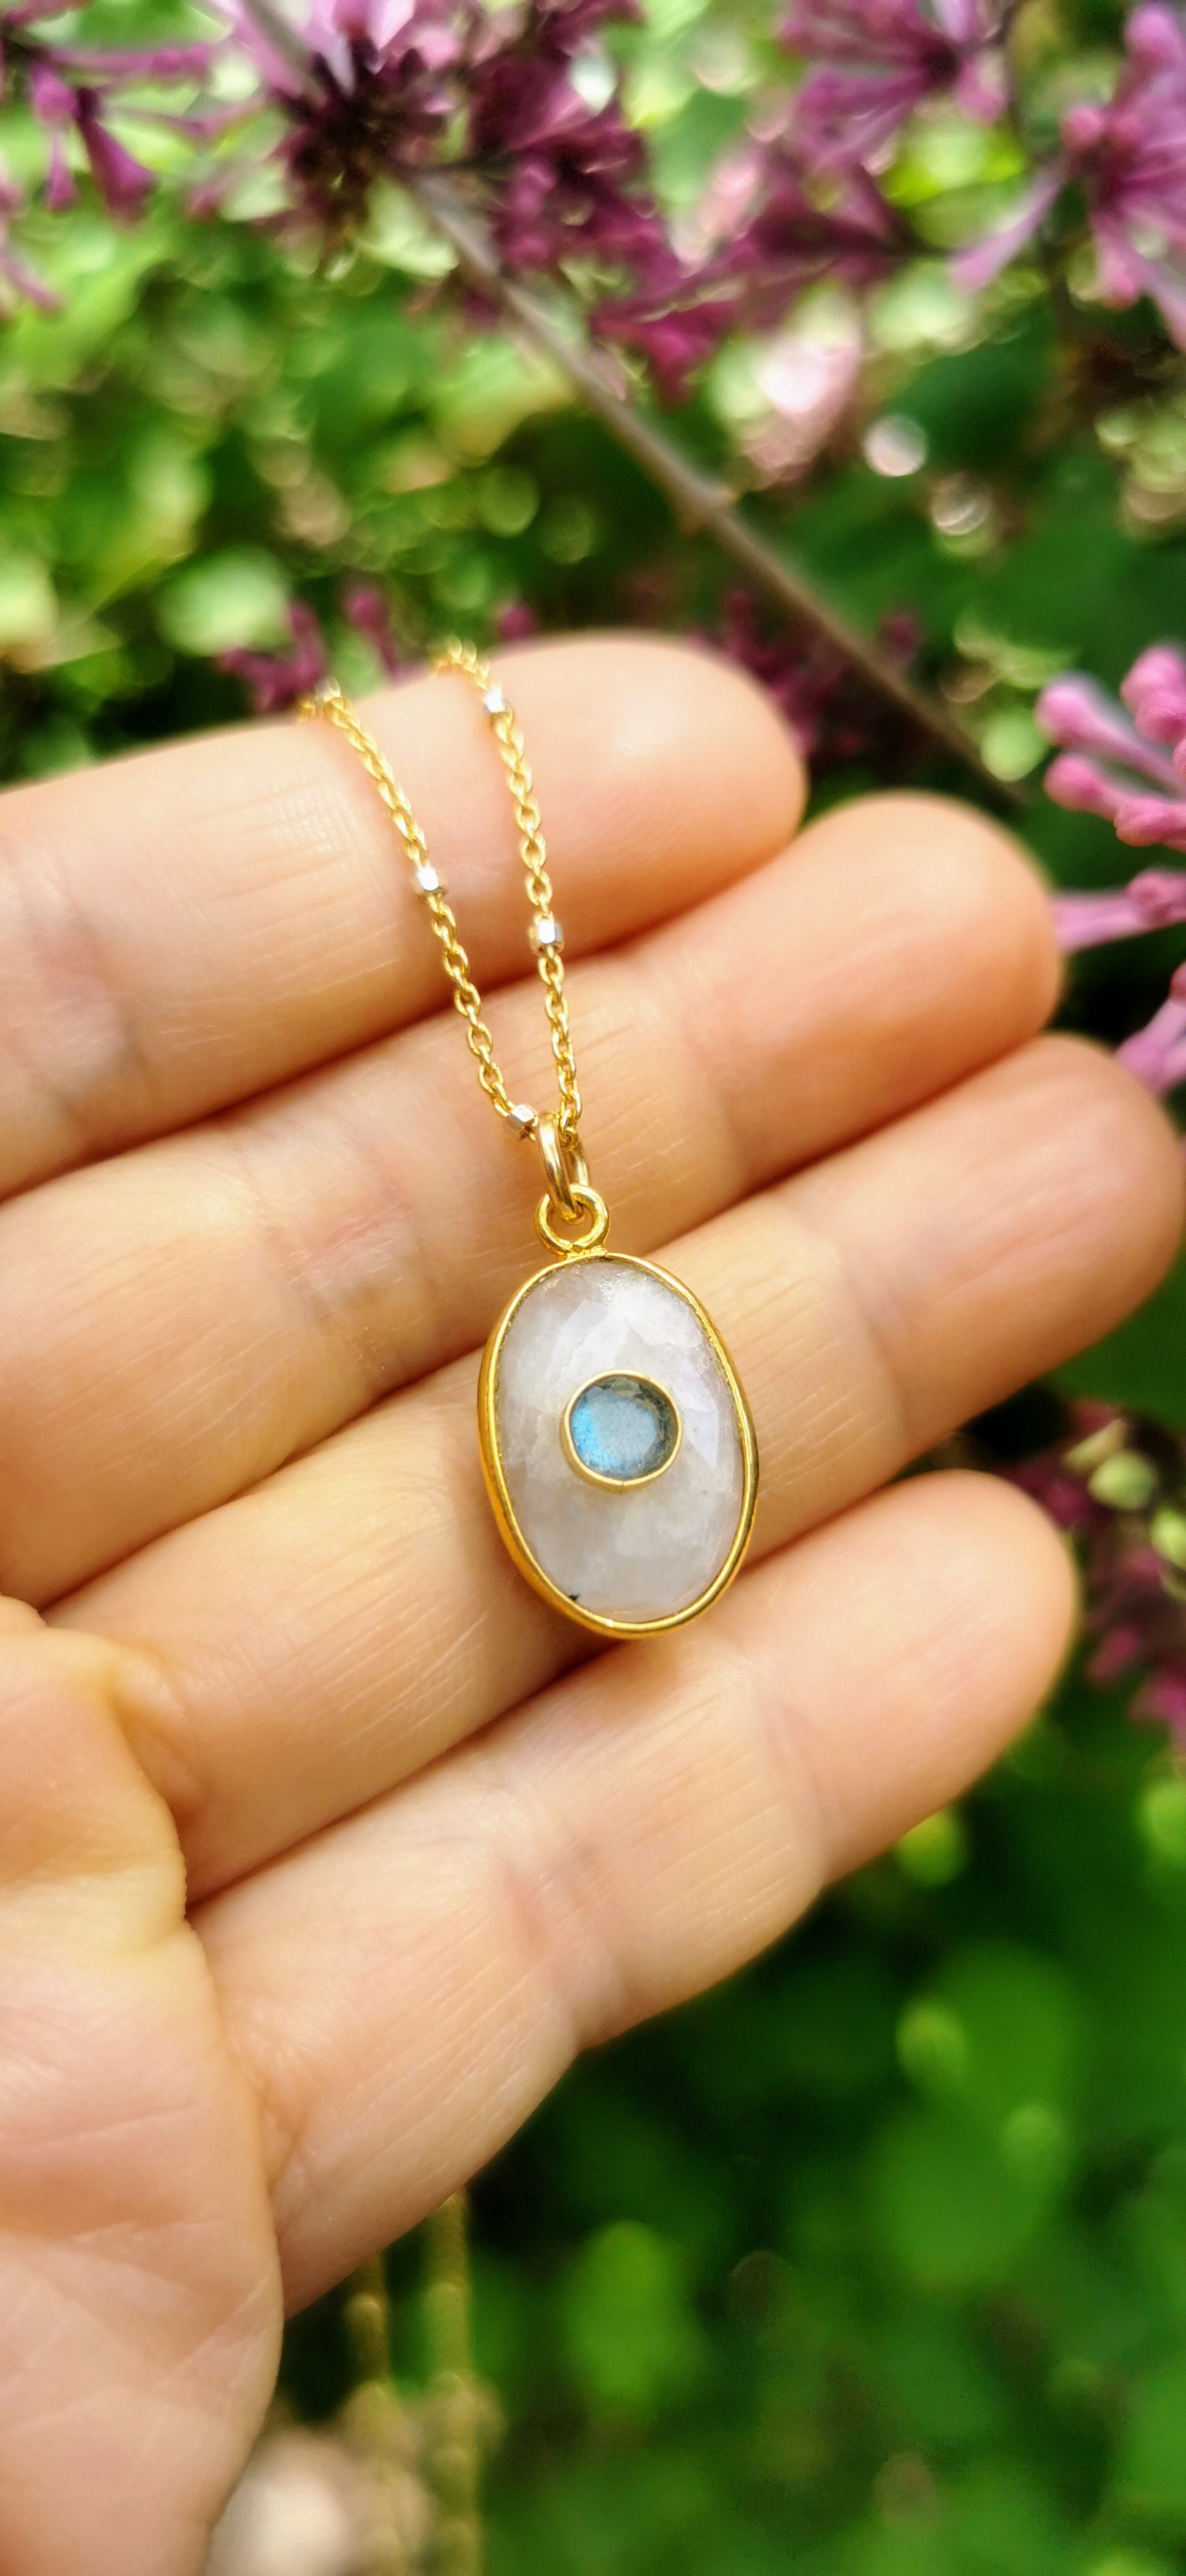 1 Grand & 4 Classic Moonstone Necklace in 14k Gold (June)